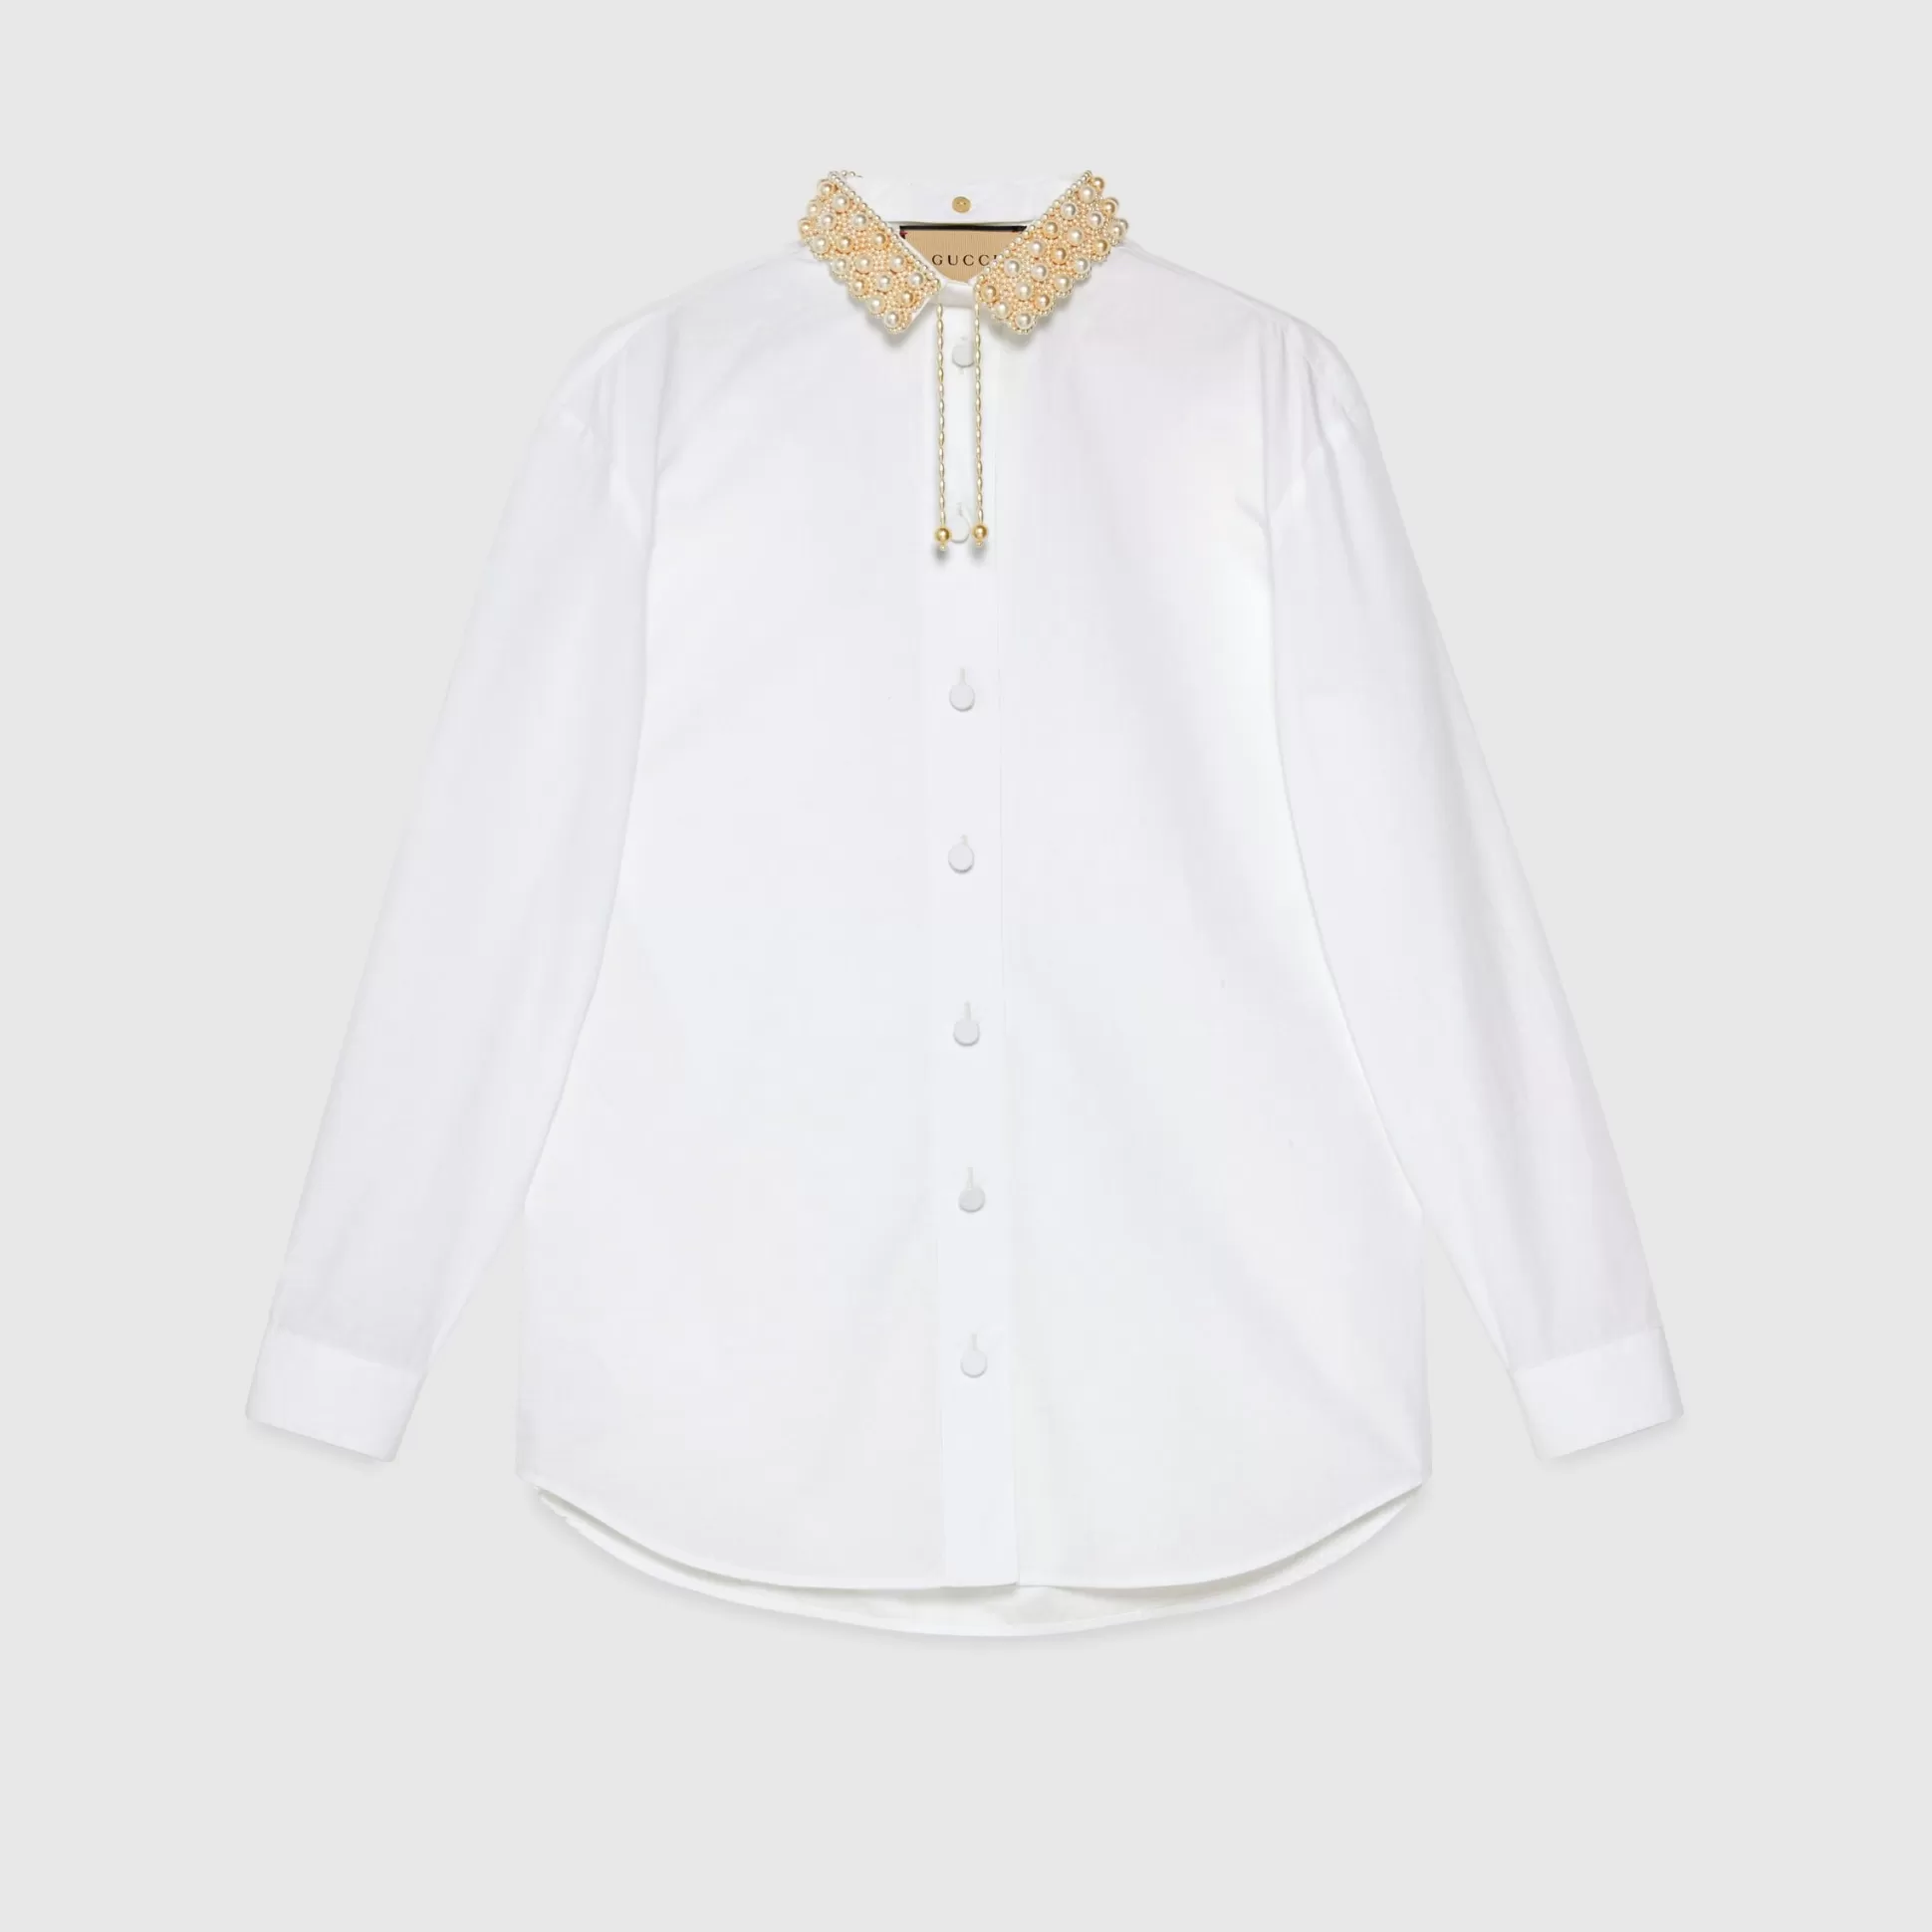 GUCCI Cotton Poplin Shirt With Embroidered Collar-Women Tops & Shirts